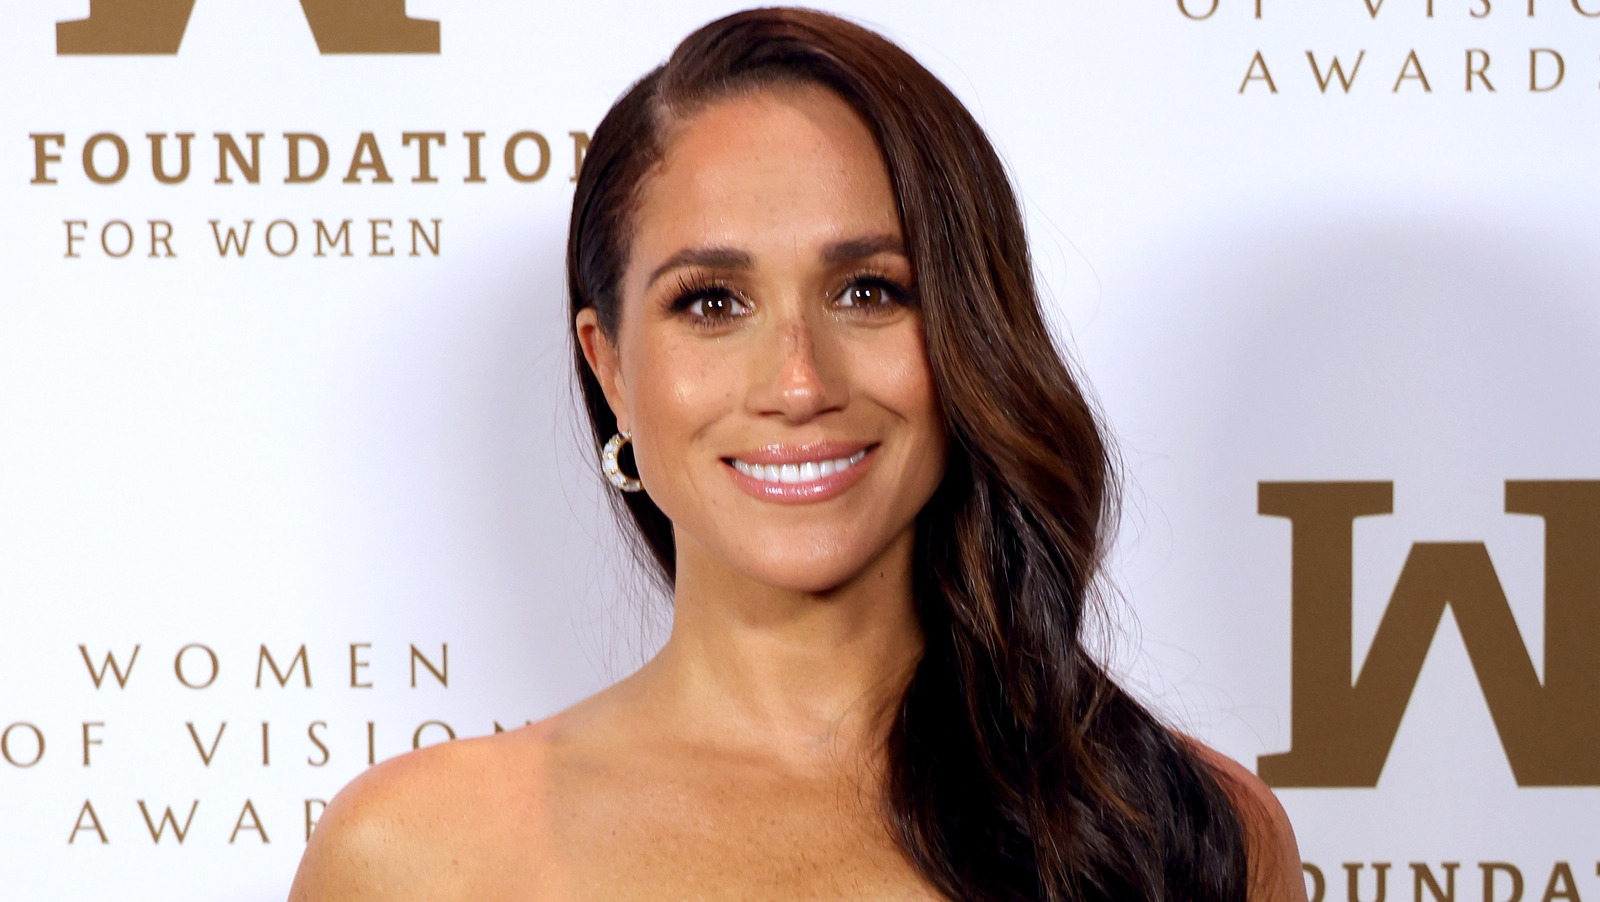 Meghan Markle’s New Nickname At The Invictus Games Has A Royal Meaning – The List